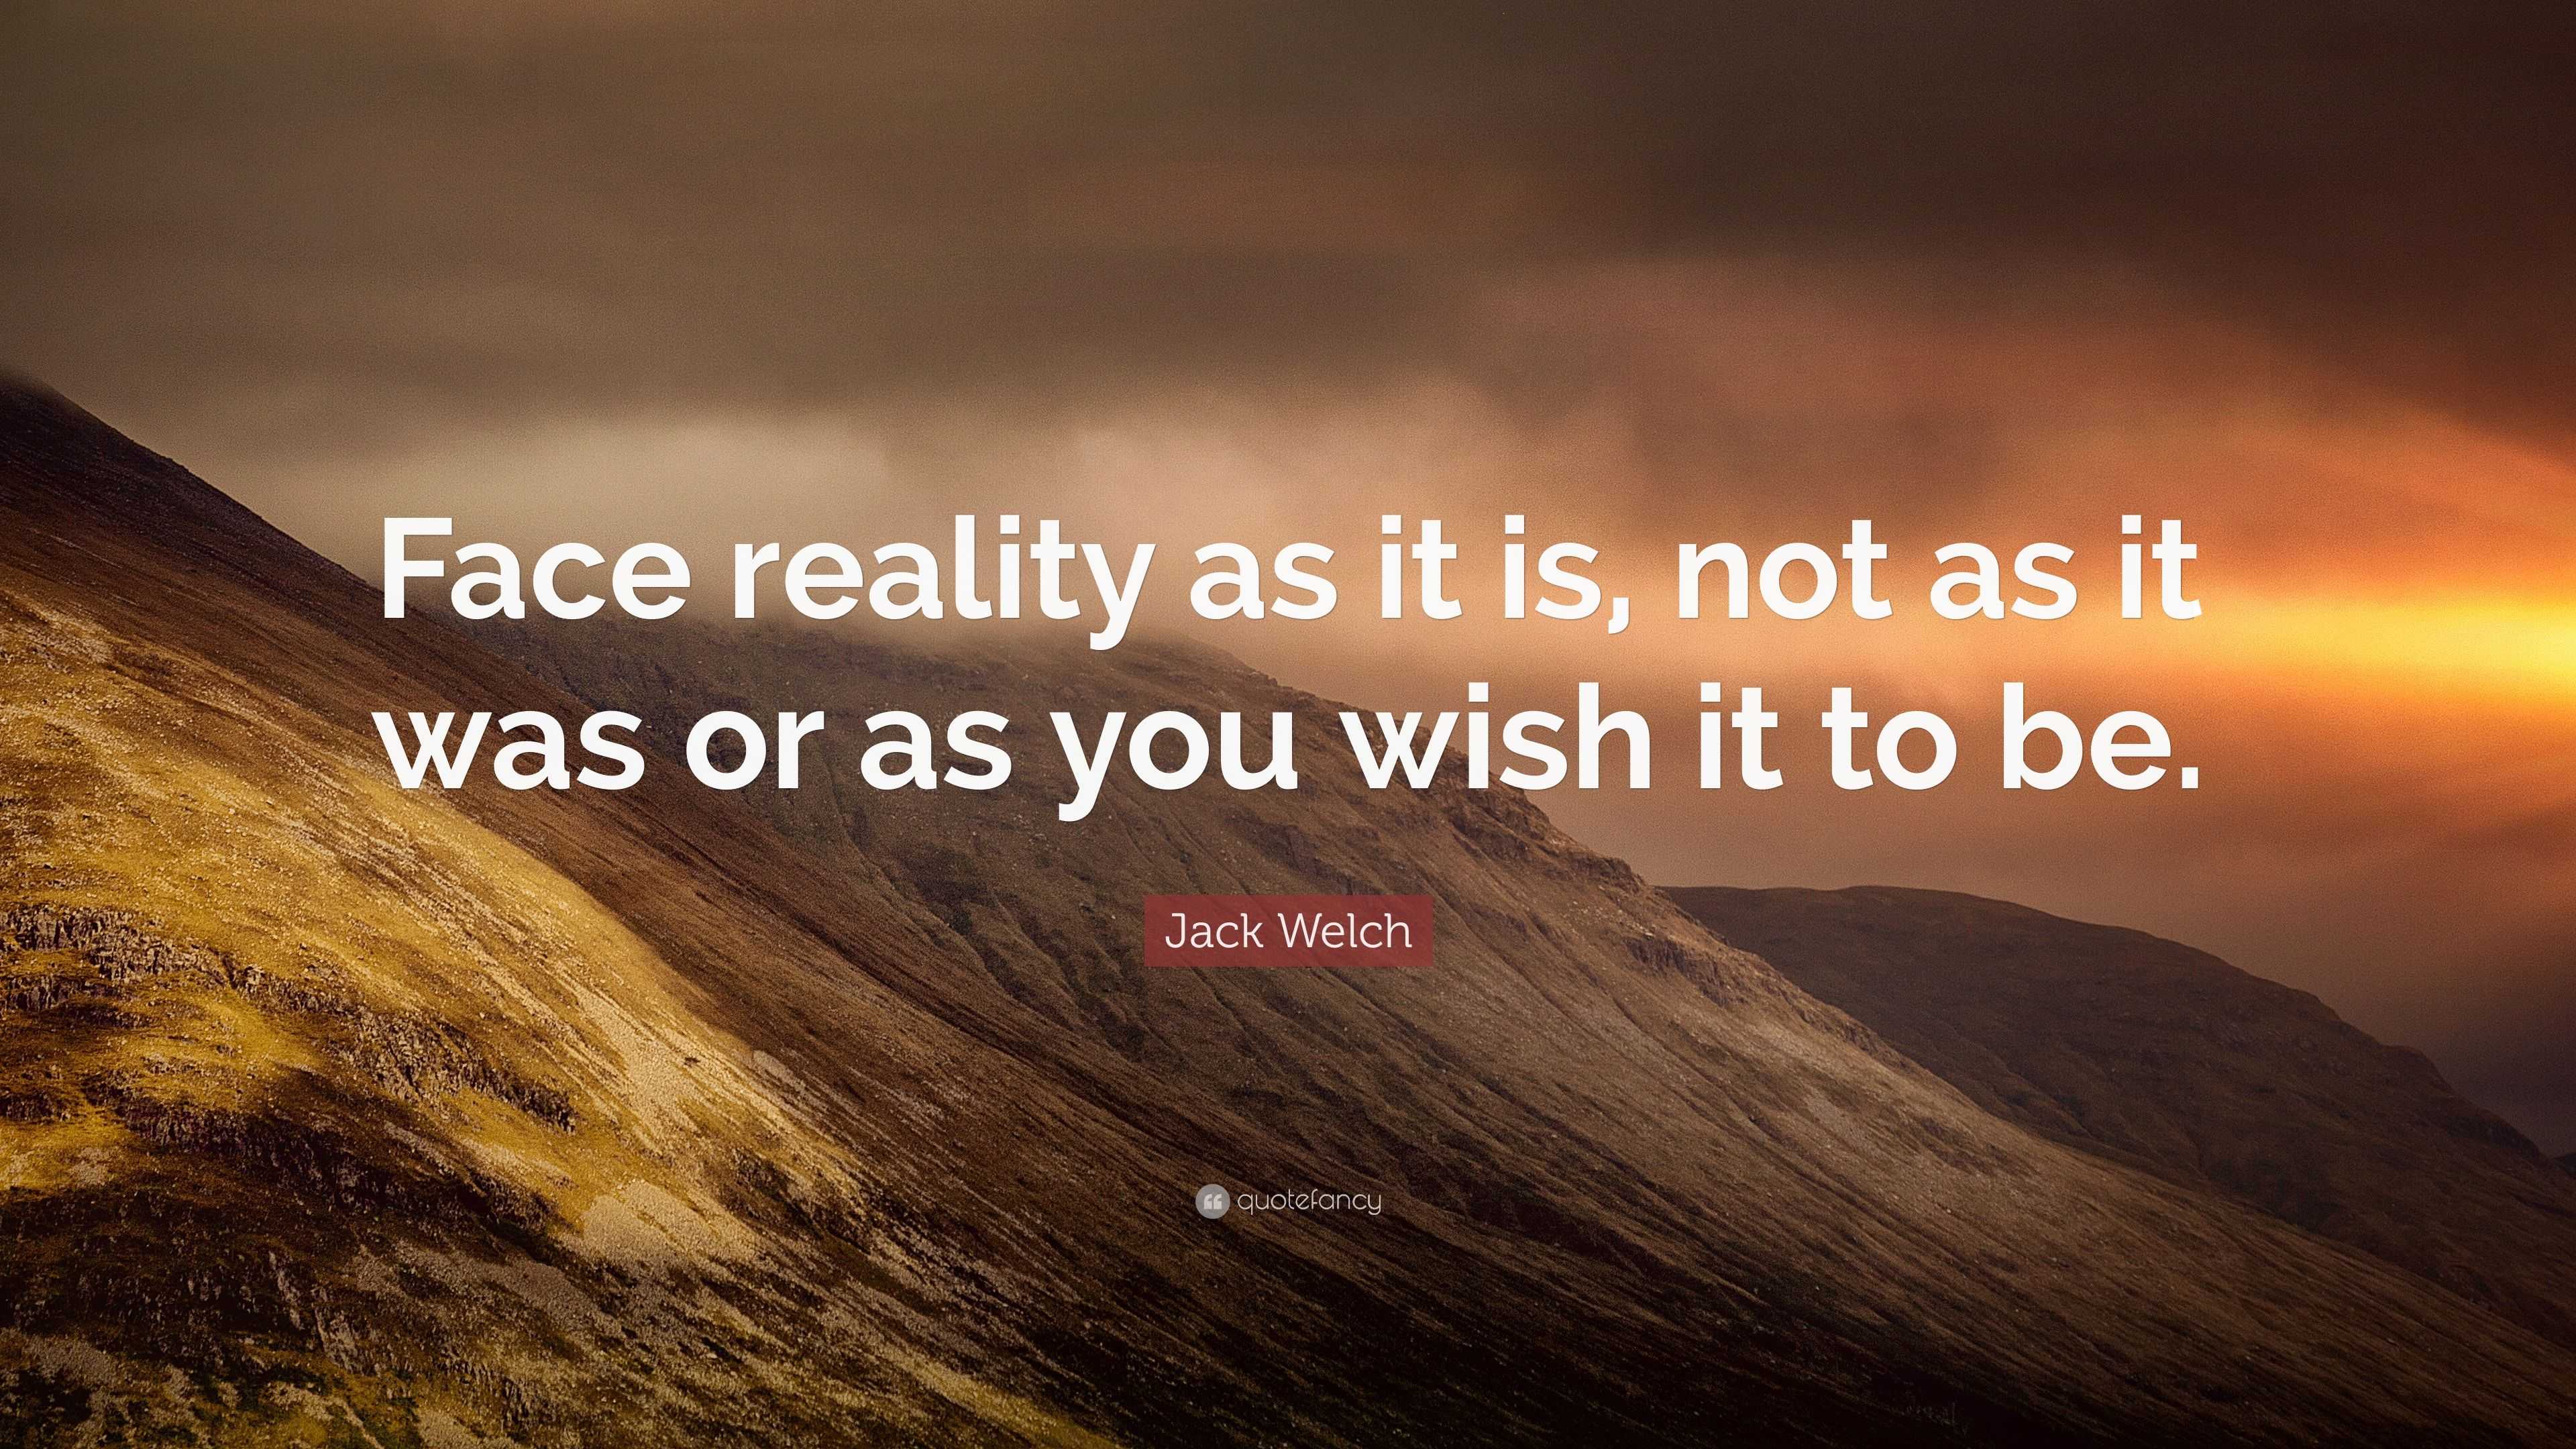 Jack Welch Quote: “Face reality as it is, not as it was or as you wish ...